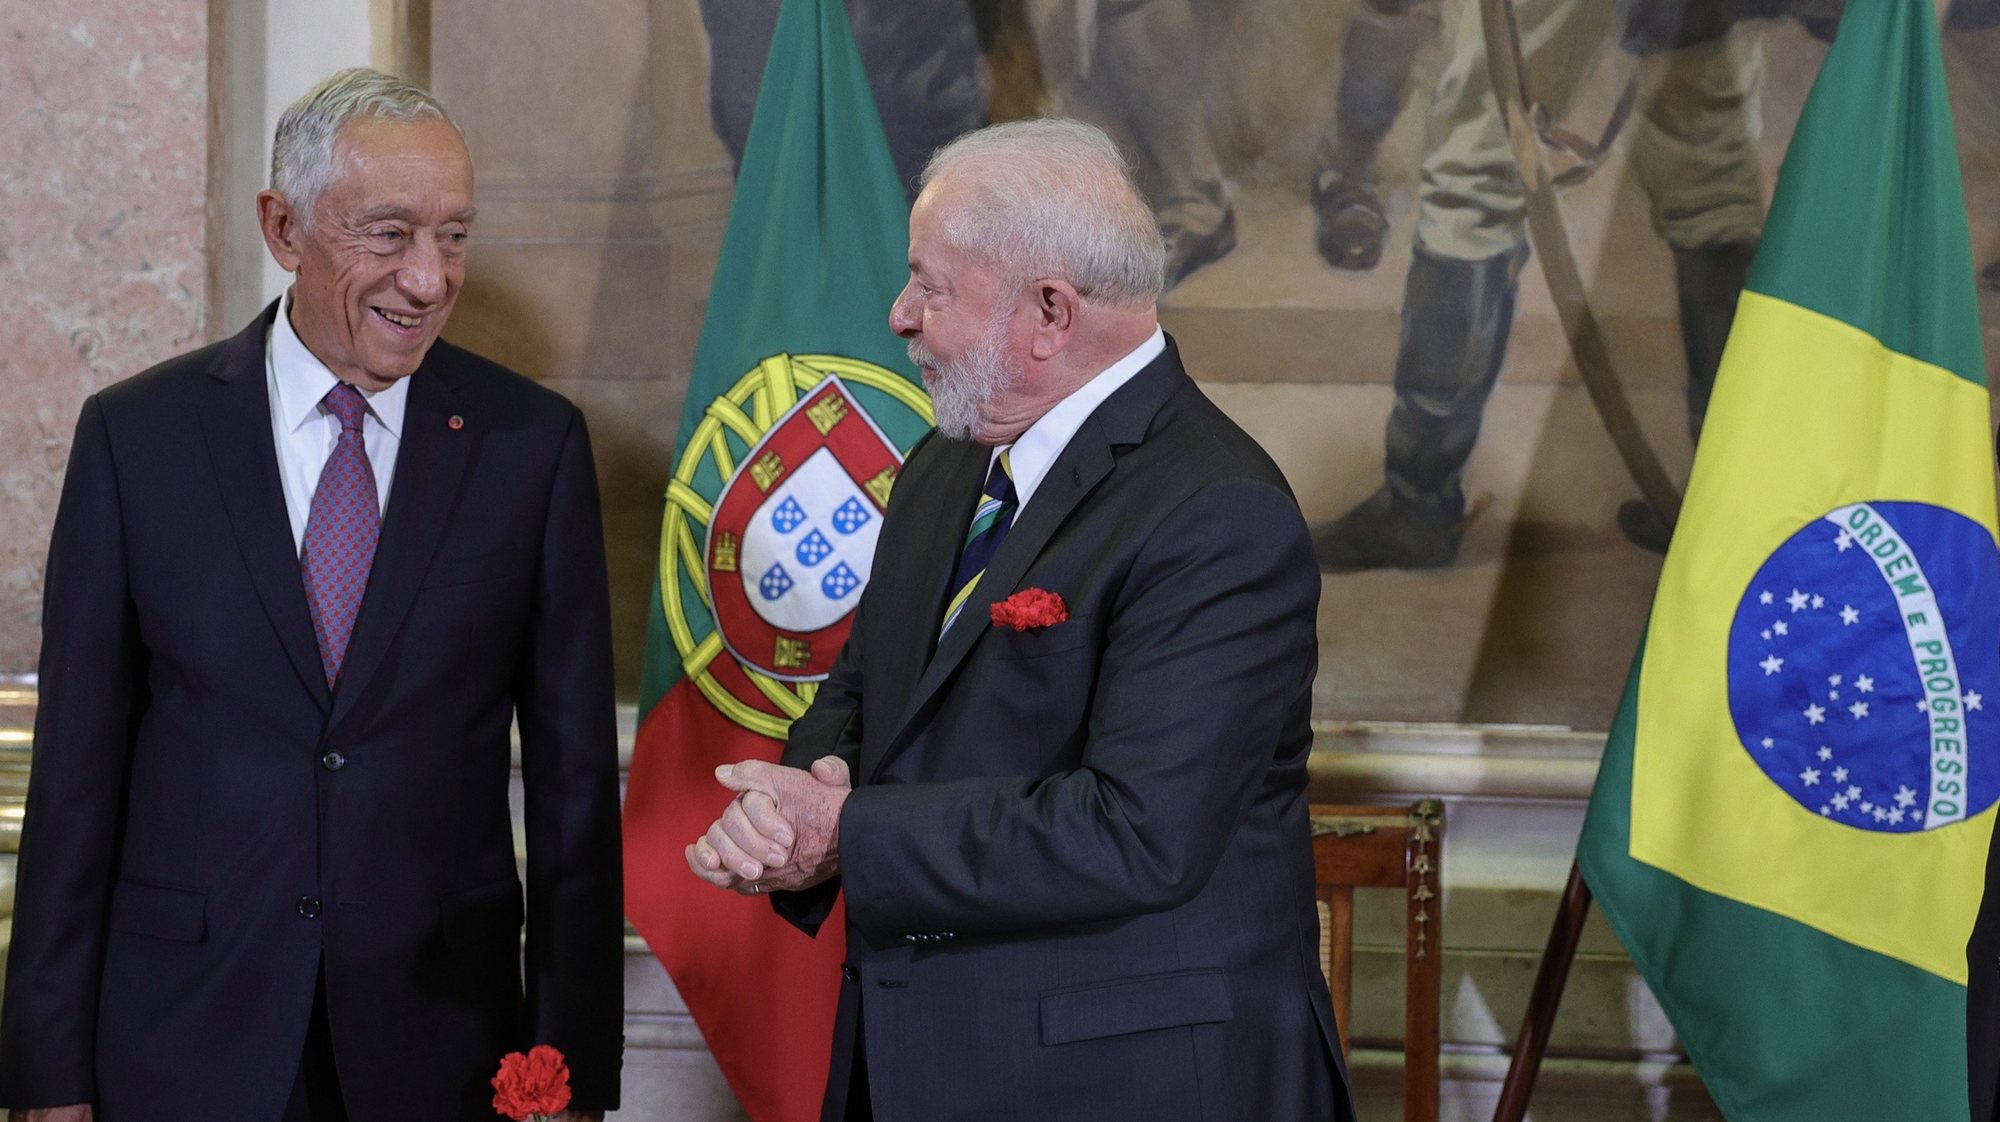 epa10590421 Brazilian President Luiz Inacio Lula da Silva (R) and his Portuguese counterpart Marcelo Rebelo de Sousa before a solemn session at the Parliament in Lisbon, Portugal, 25 April 2023. Portugal celebrates the 49th anniversary of the Carnation Revolution that ended the authoritarian regime of Estado Novo (New State) that ruled the country between 1926 to 1974.  EPA/ANTONIO COTRIM